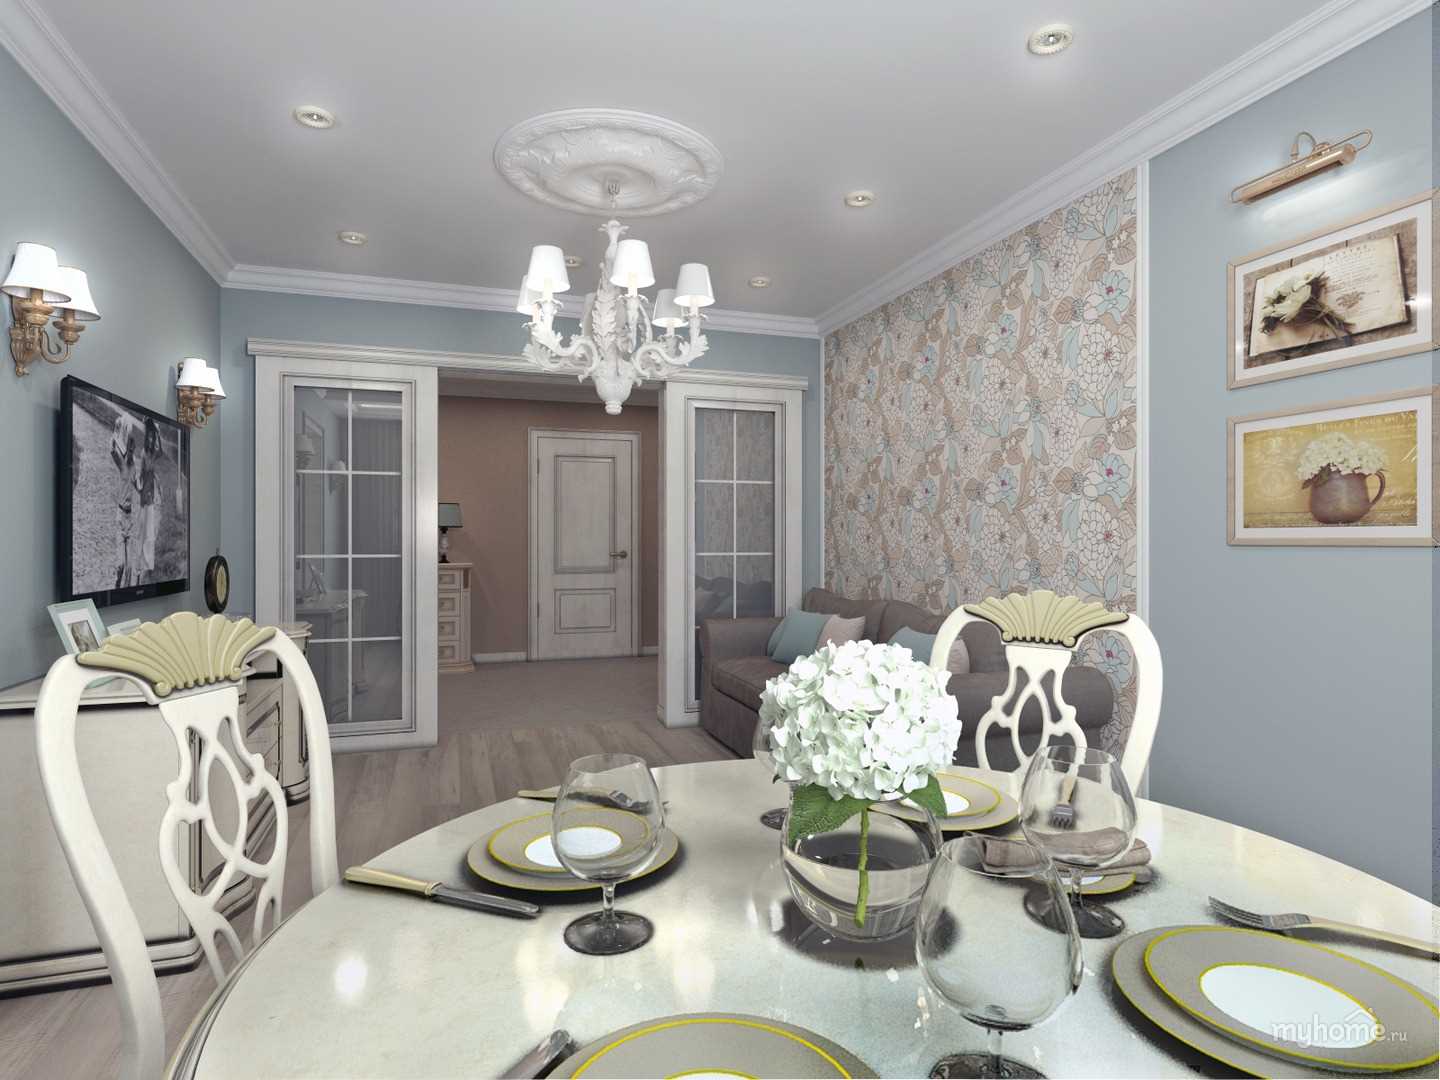 variant of the unusual interior of the apartment in the style of a modern classic